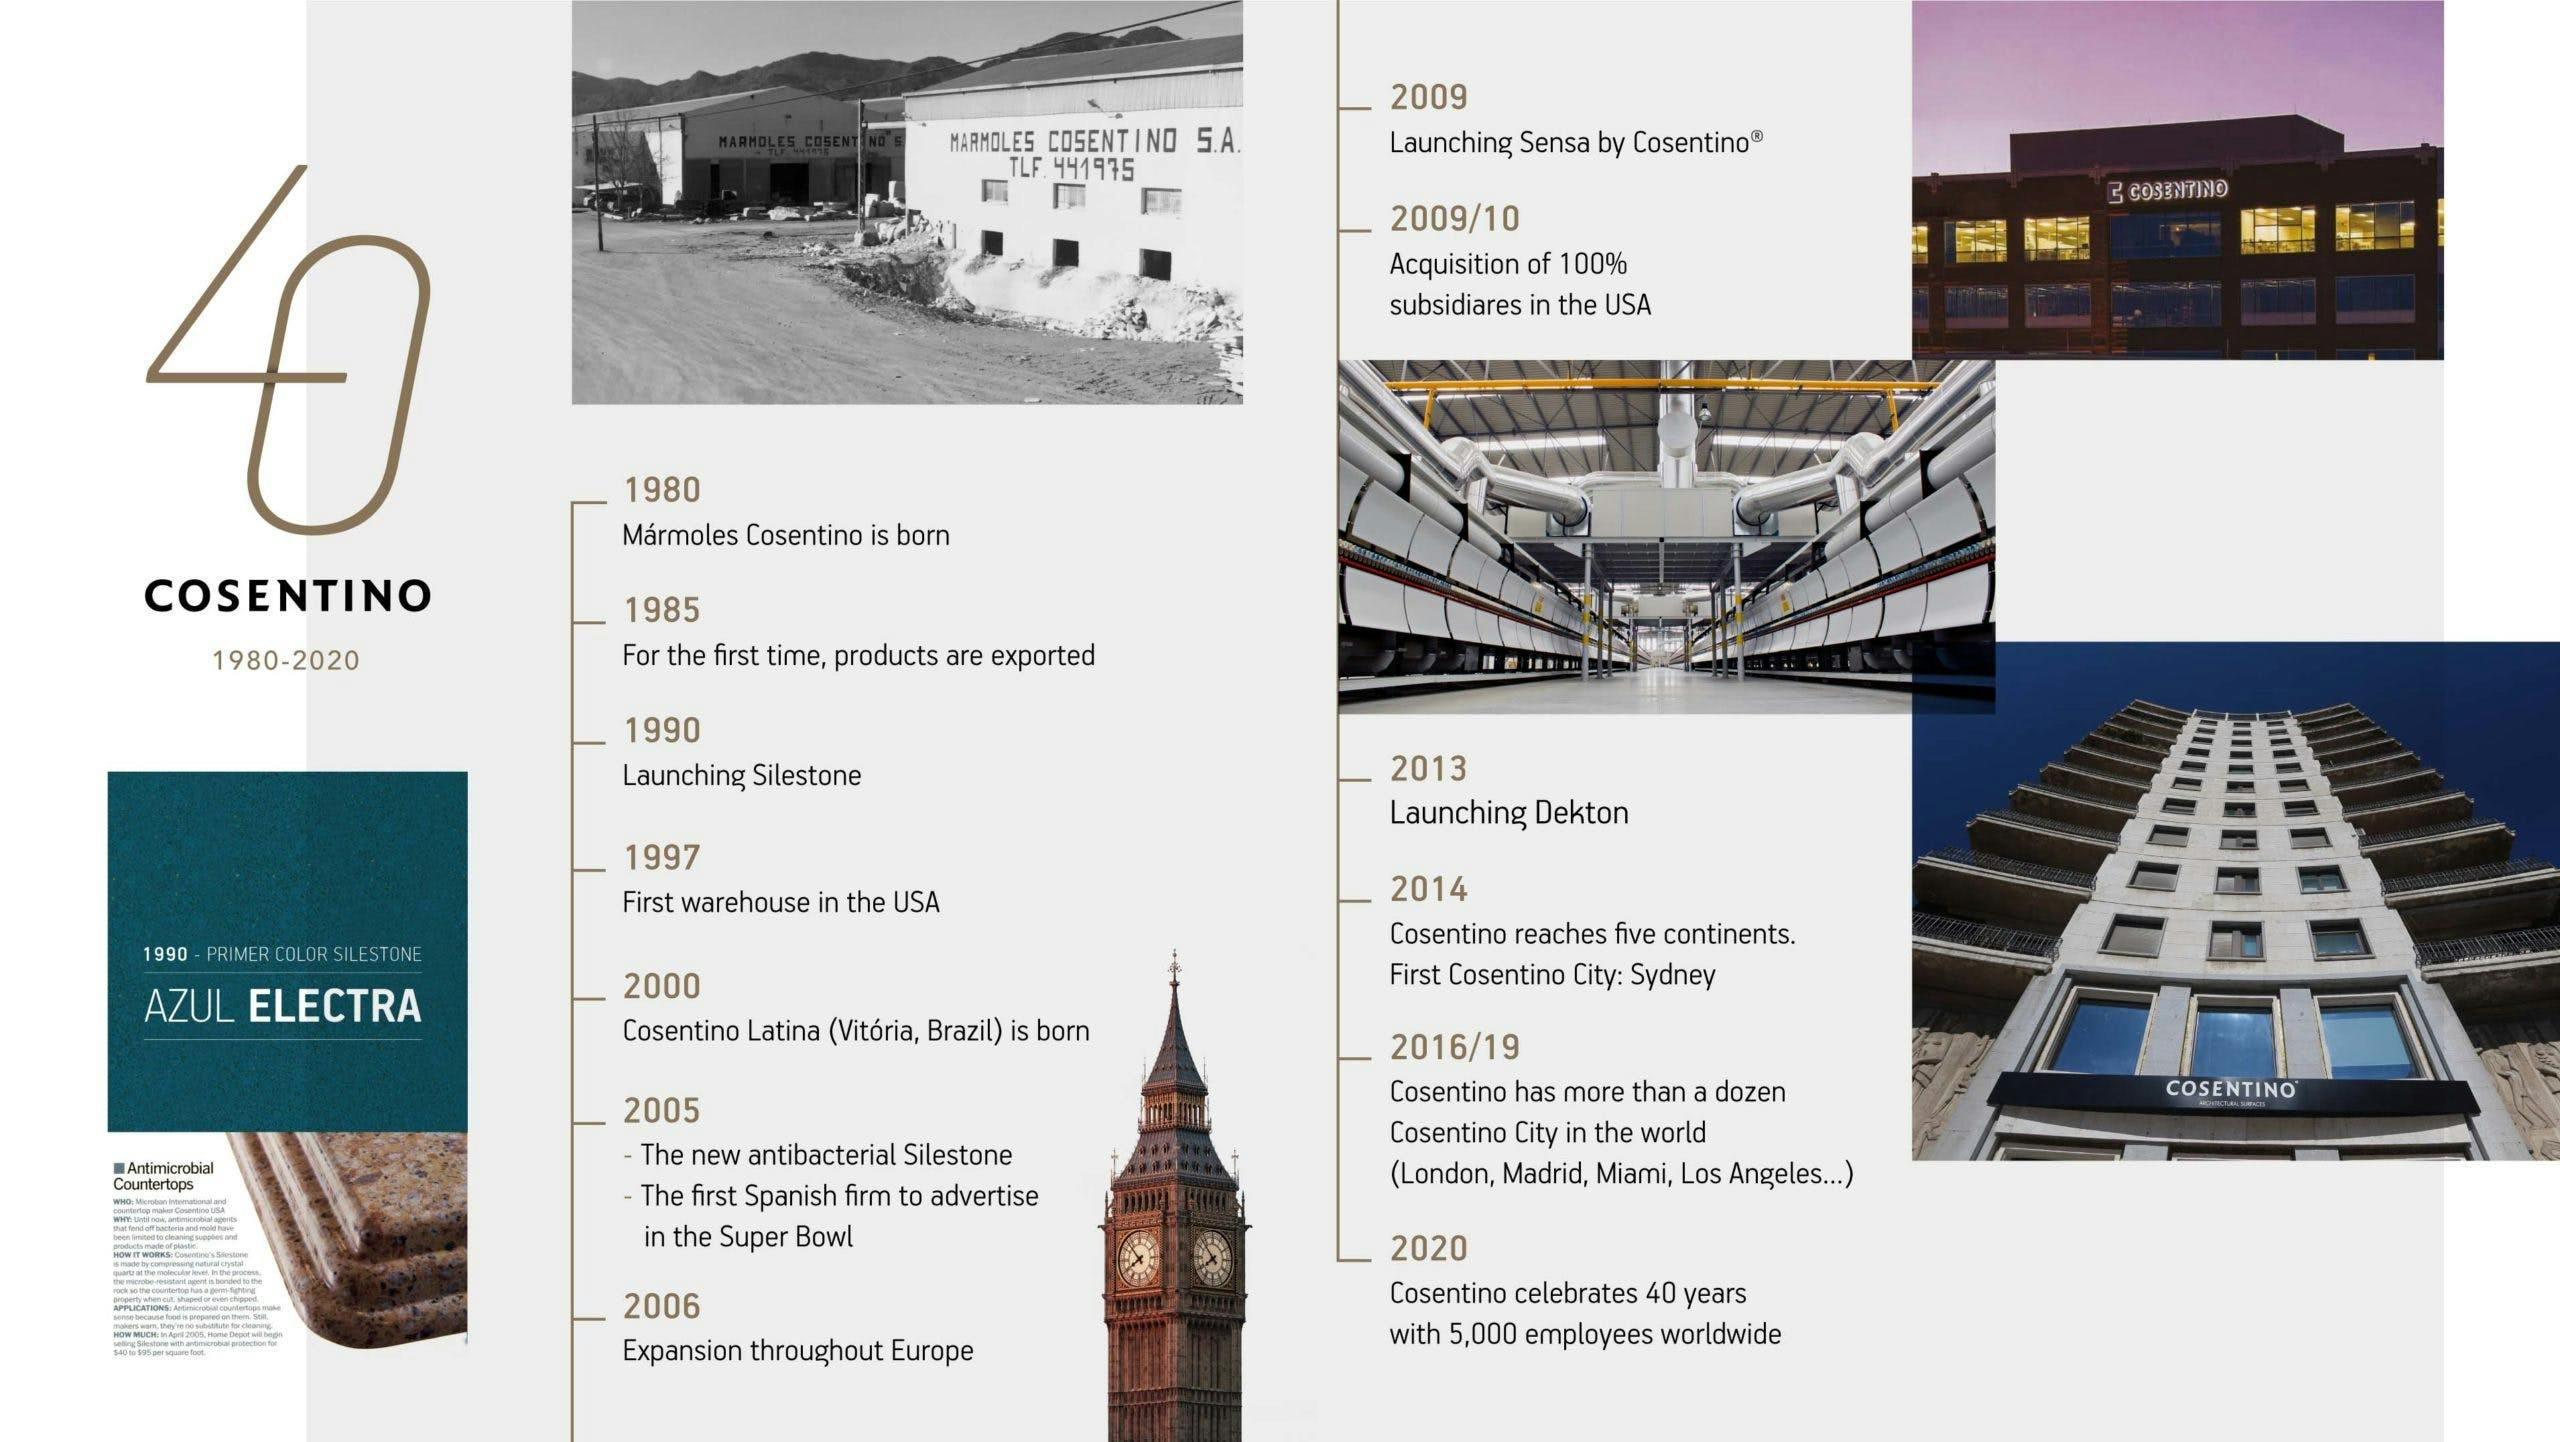 Image 33 of Timeline Cosentino 40 anniversary ENG scaled 1 in Cosentino, 40 years of international growth and expansion - Cosentino